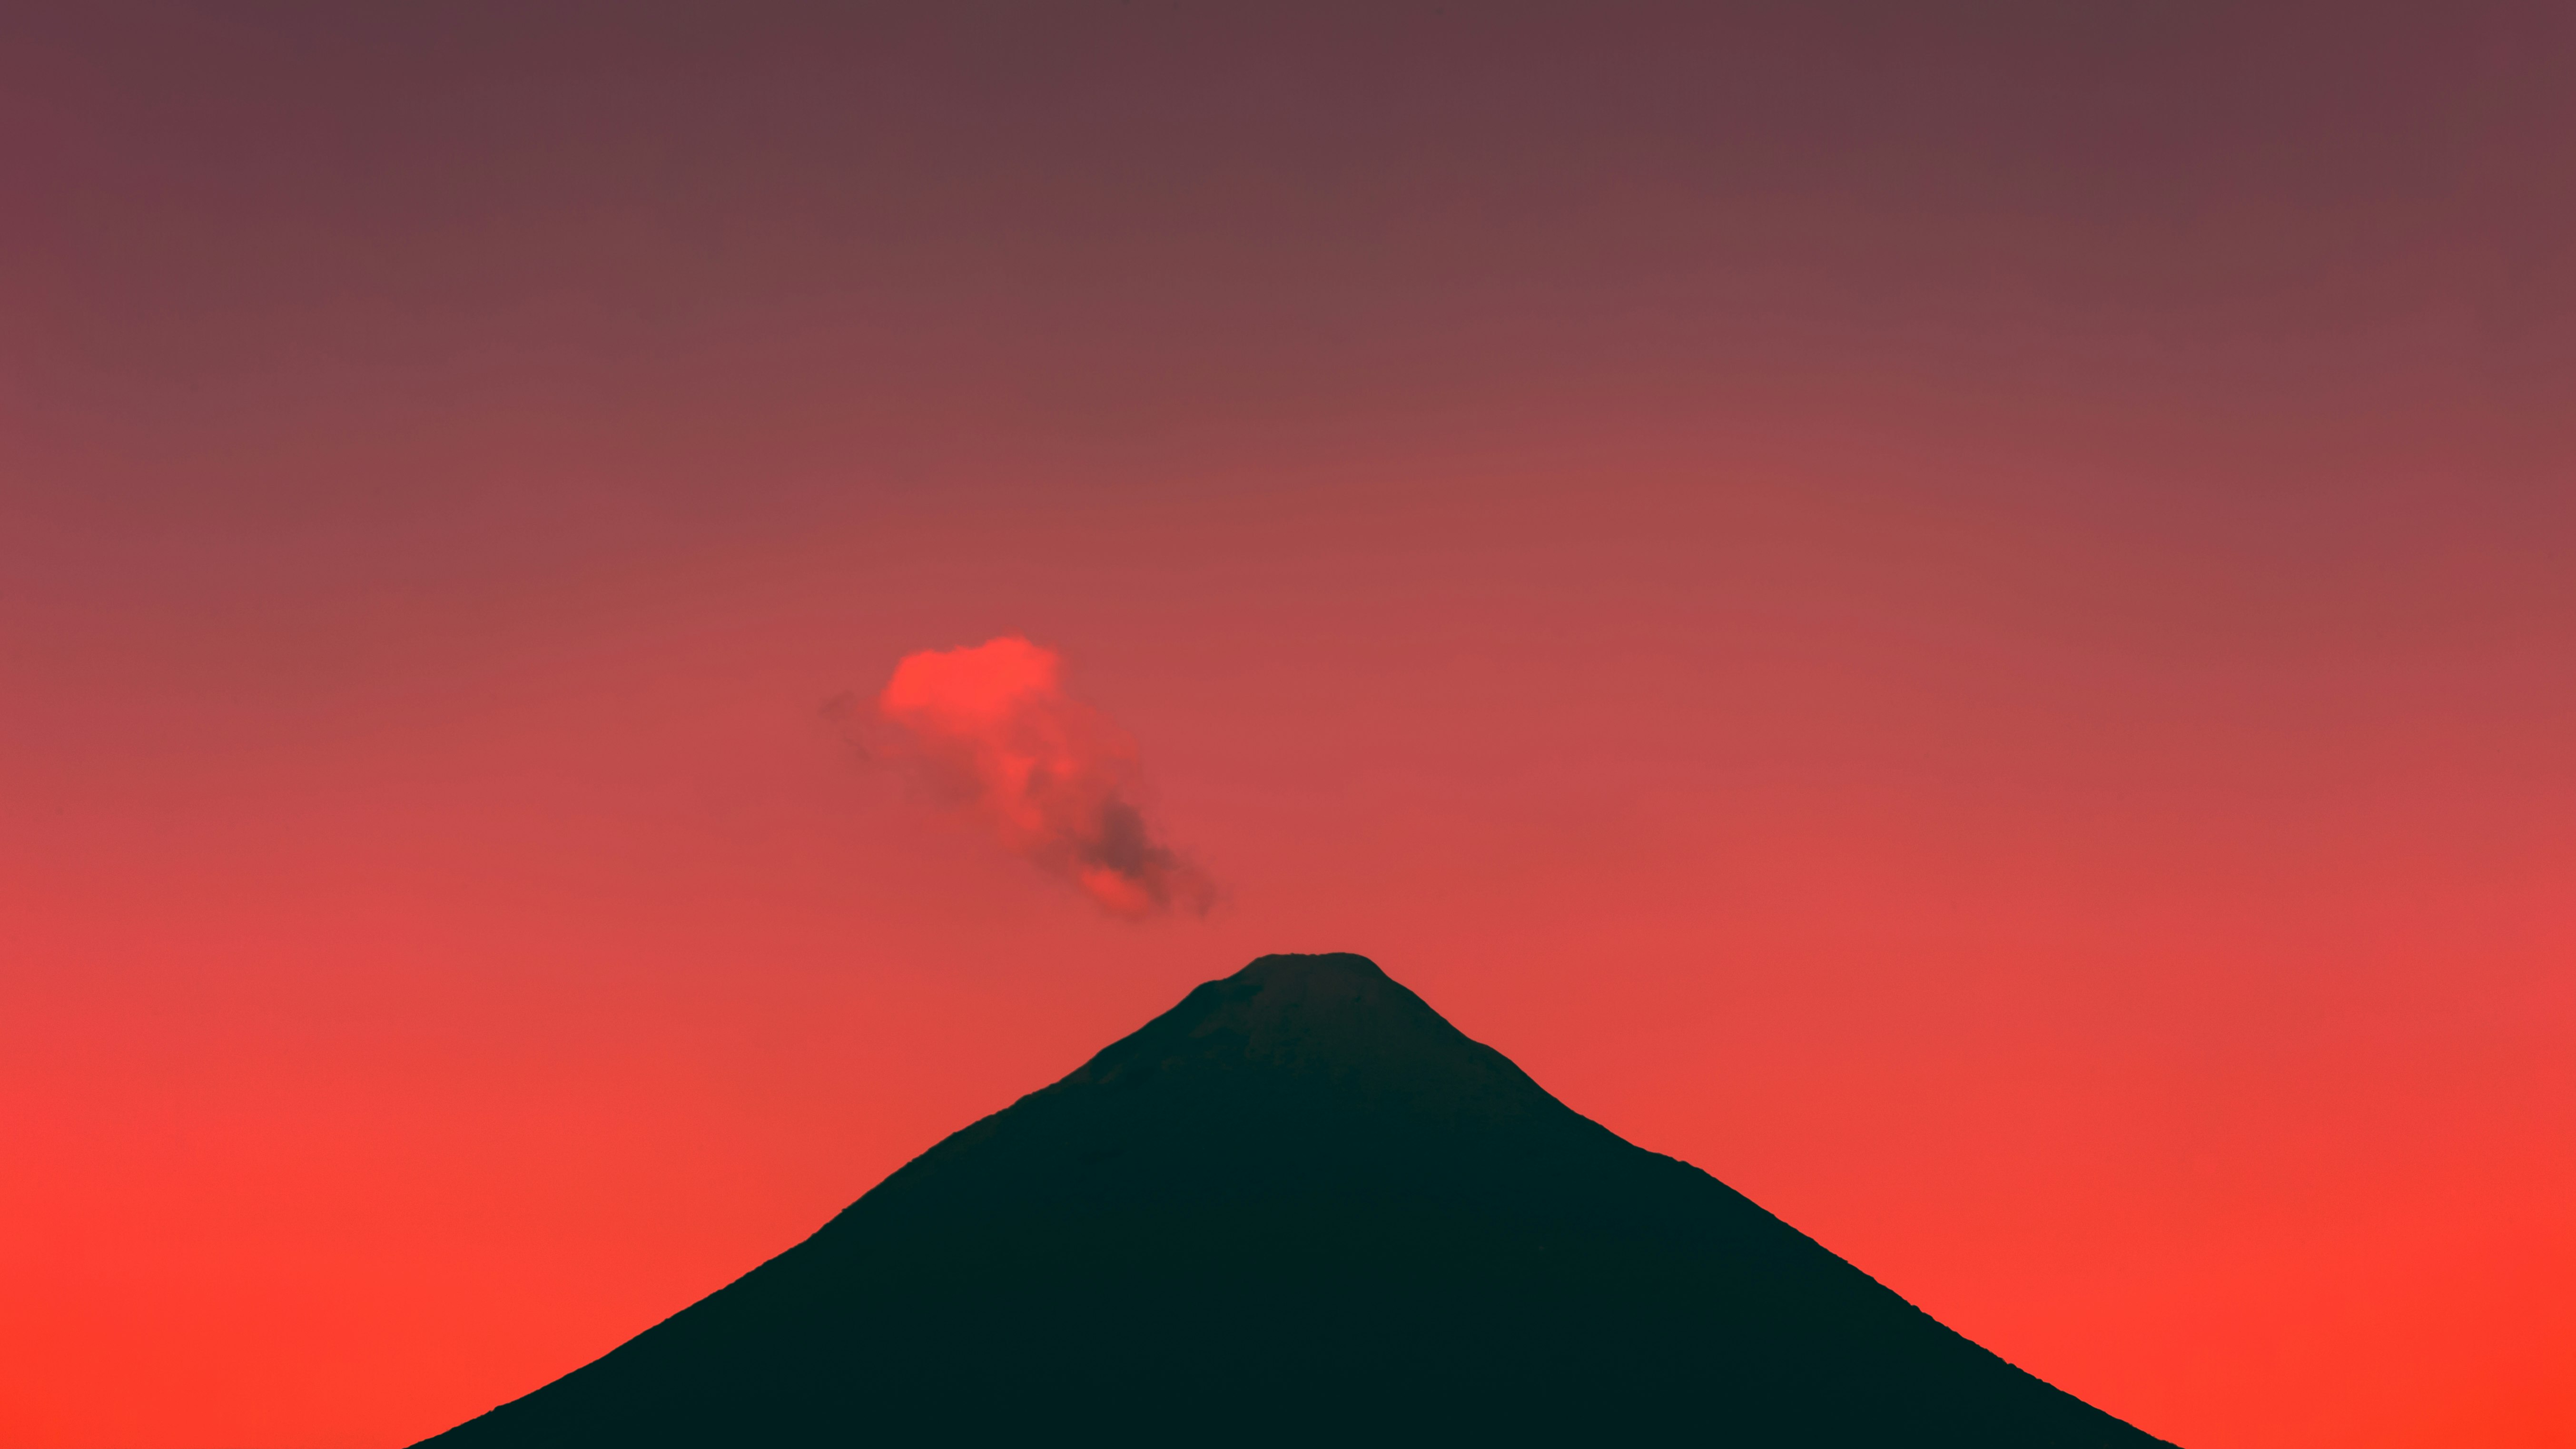 silhouette of mountain under cloudy sky during daytime